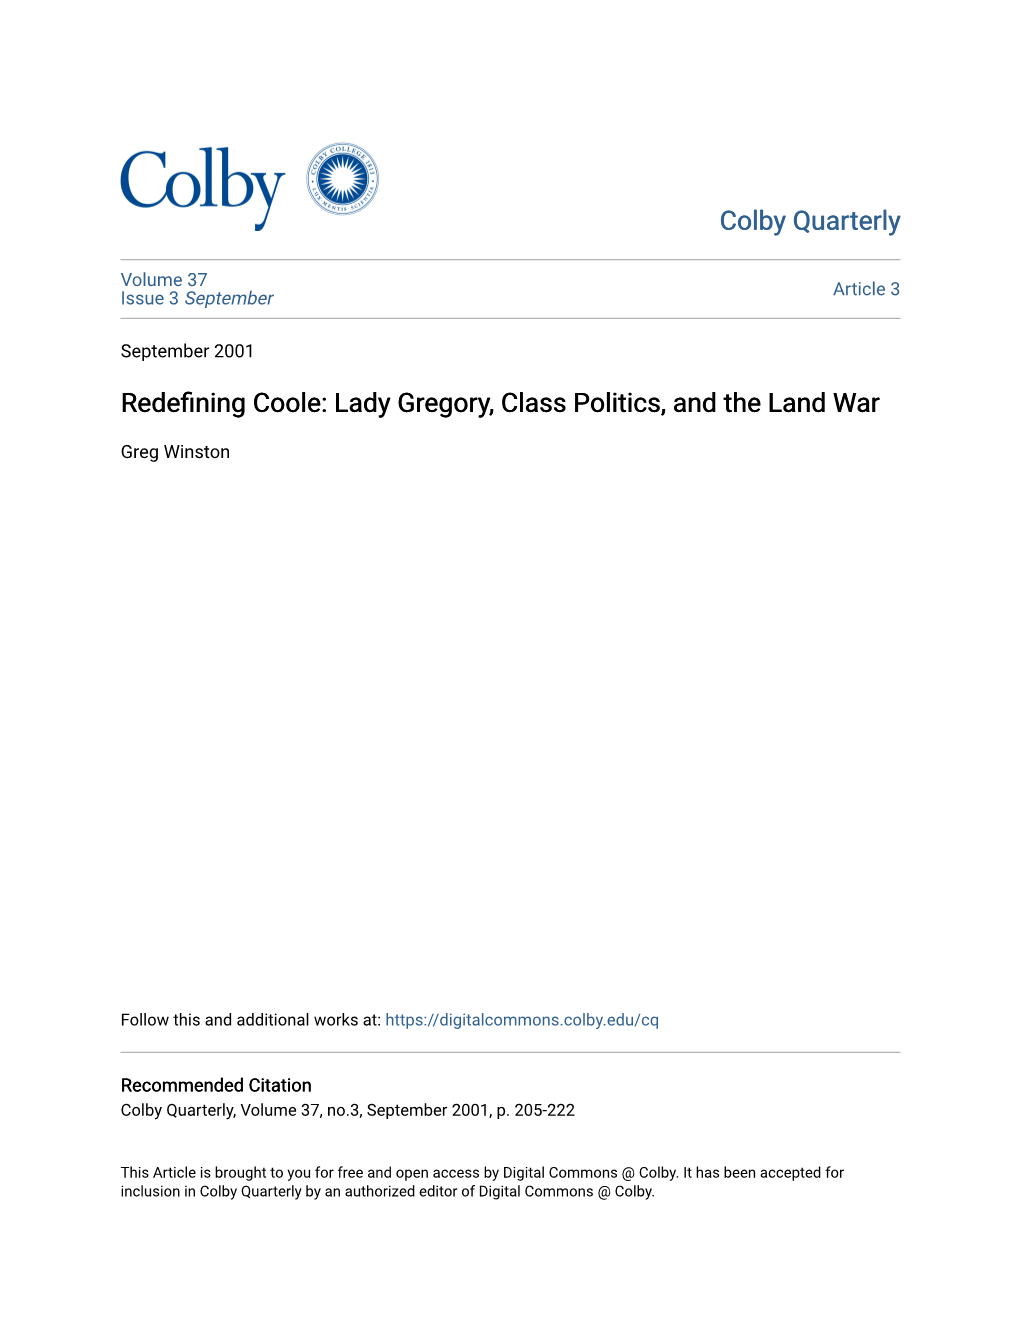 Redefining Coole: Lady Gregory, Class Politics, and the Land War